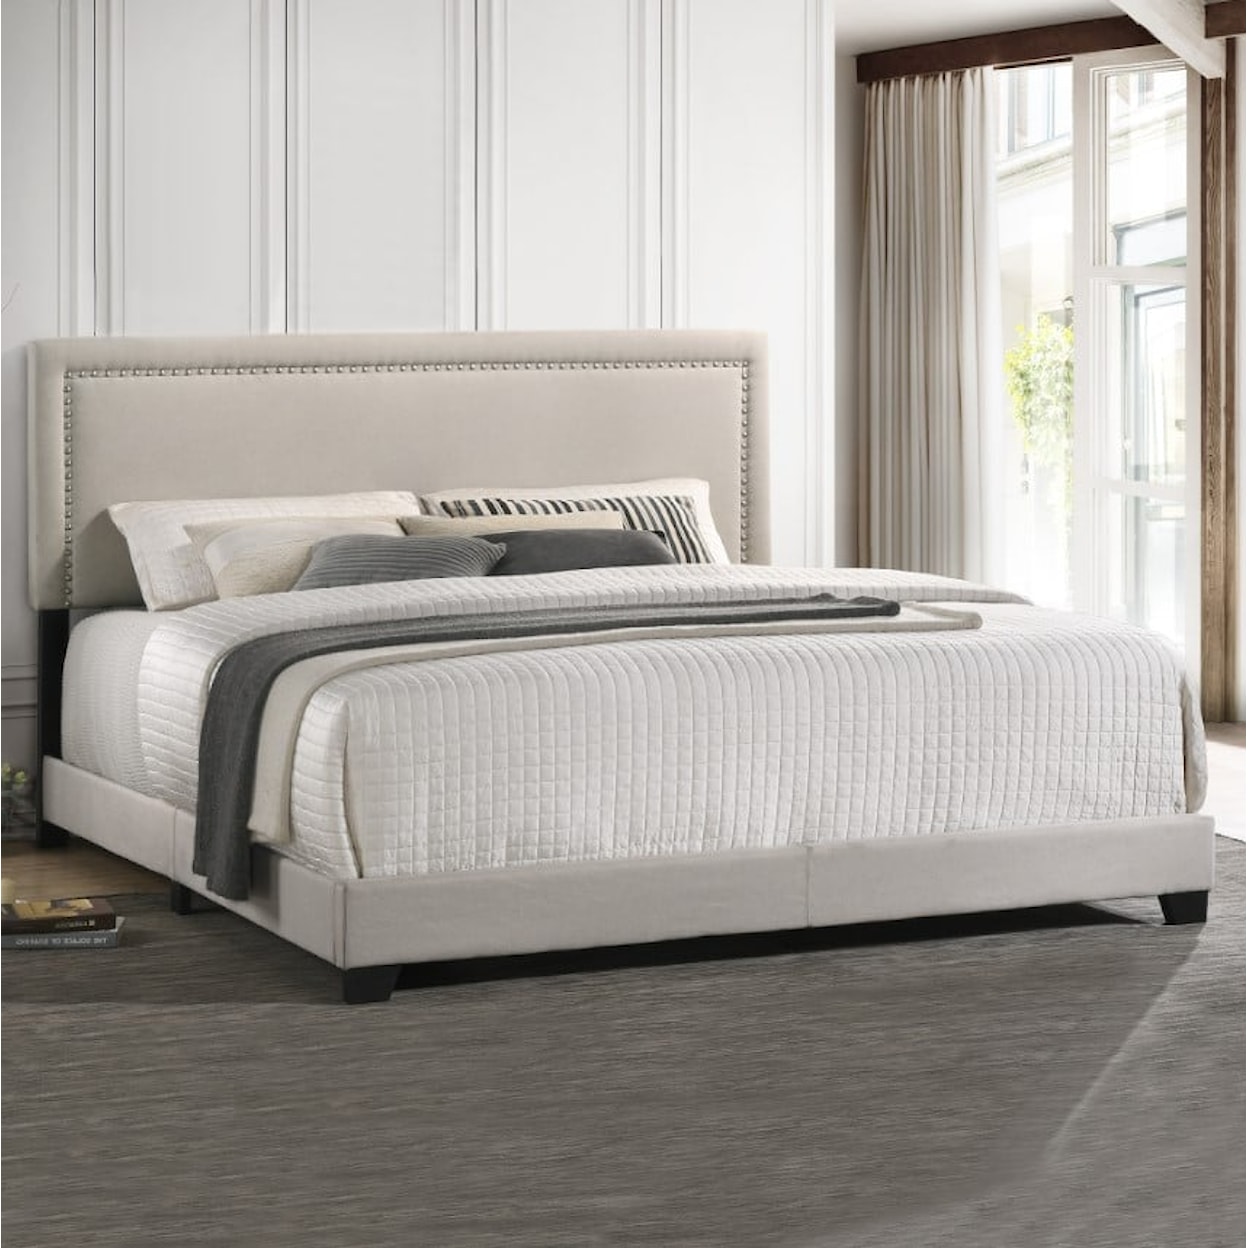 Intercon Upholstered Beds Zion Queen Upholstered Bed